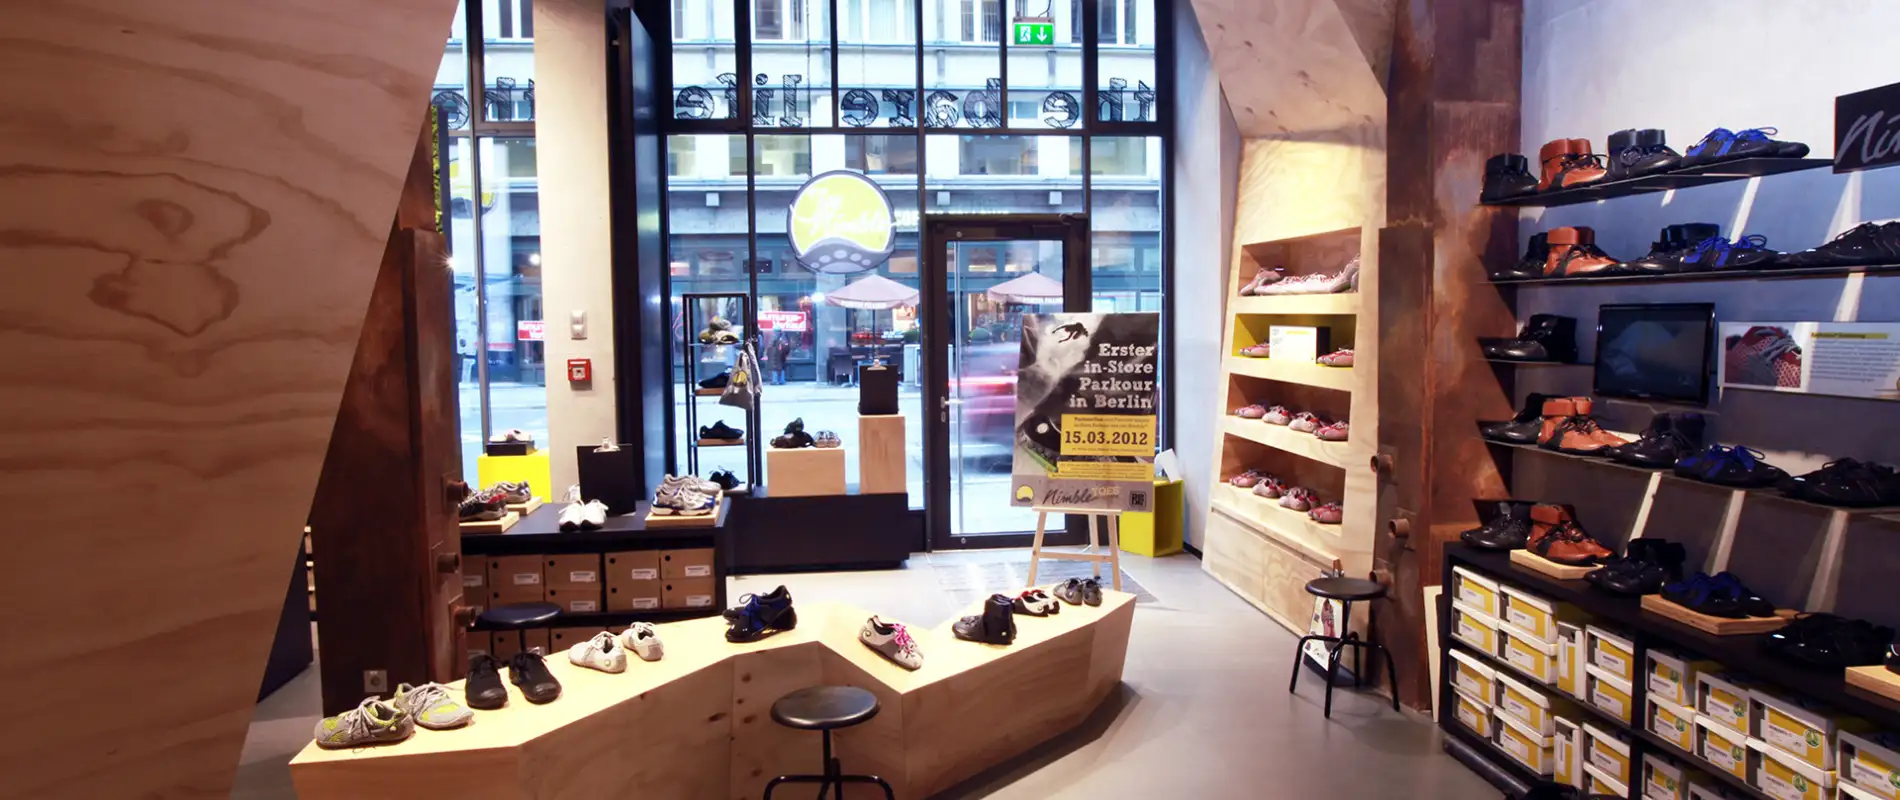 Monobrand Concept - Joe Nimble Flagship Store Berlin - wooden room creation - indoor - view to the entrance